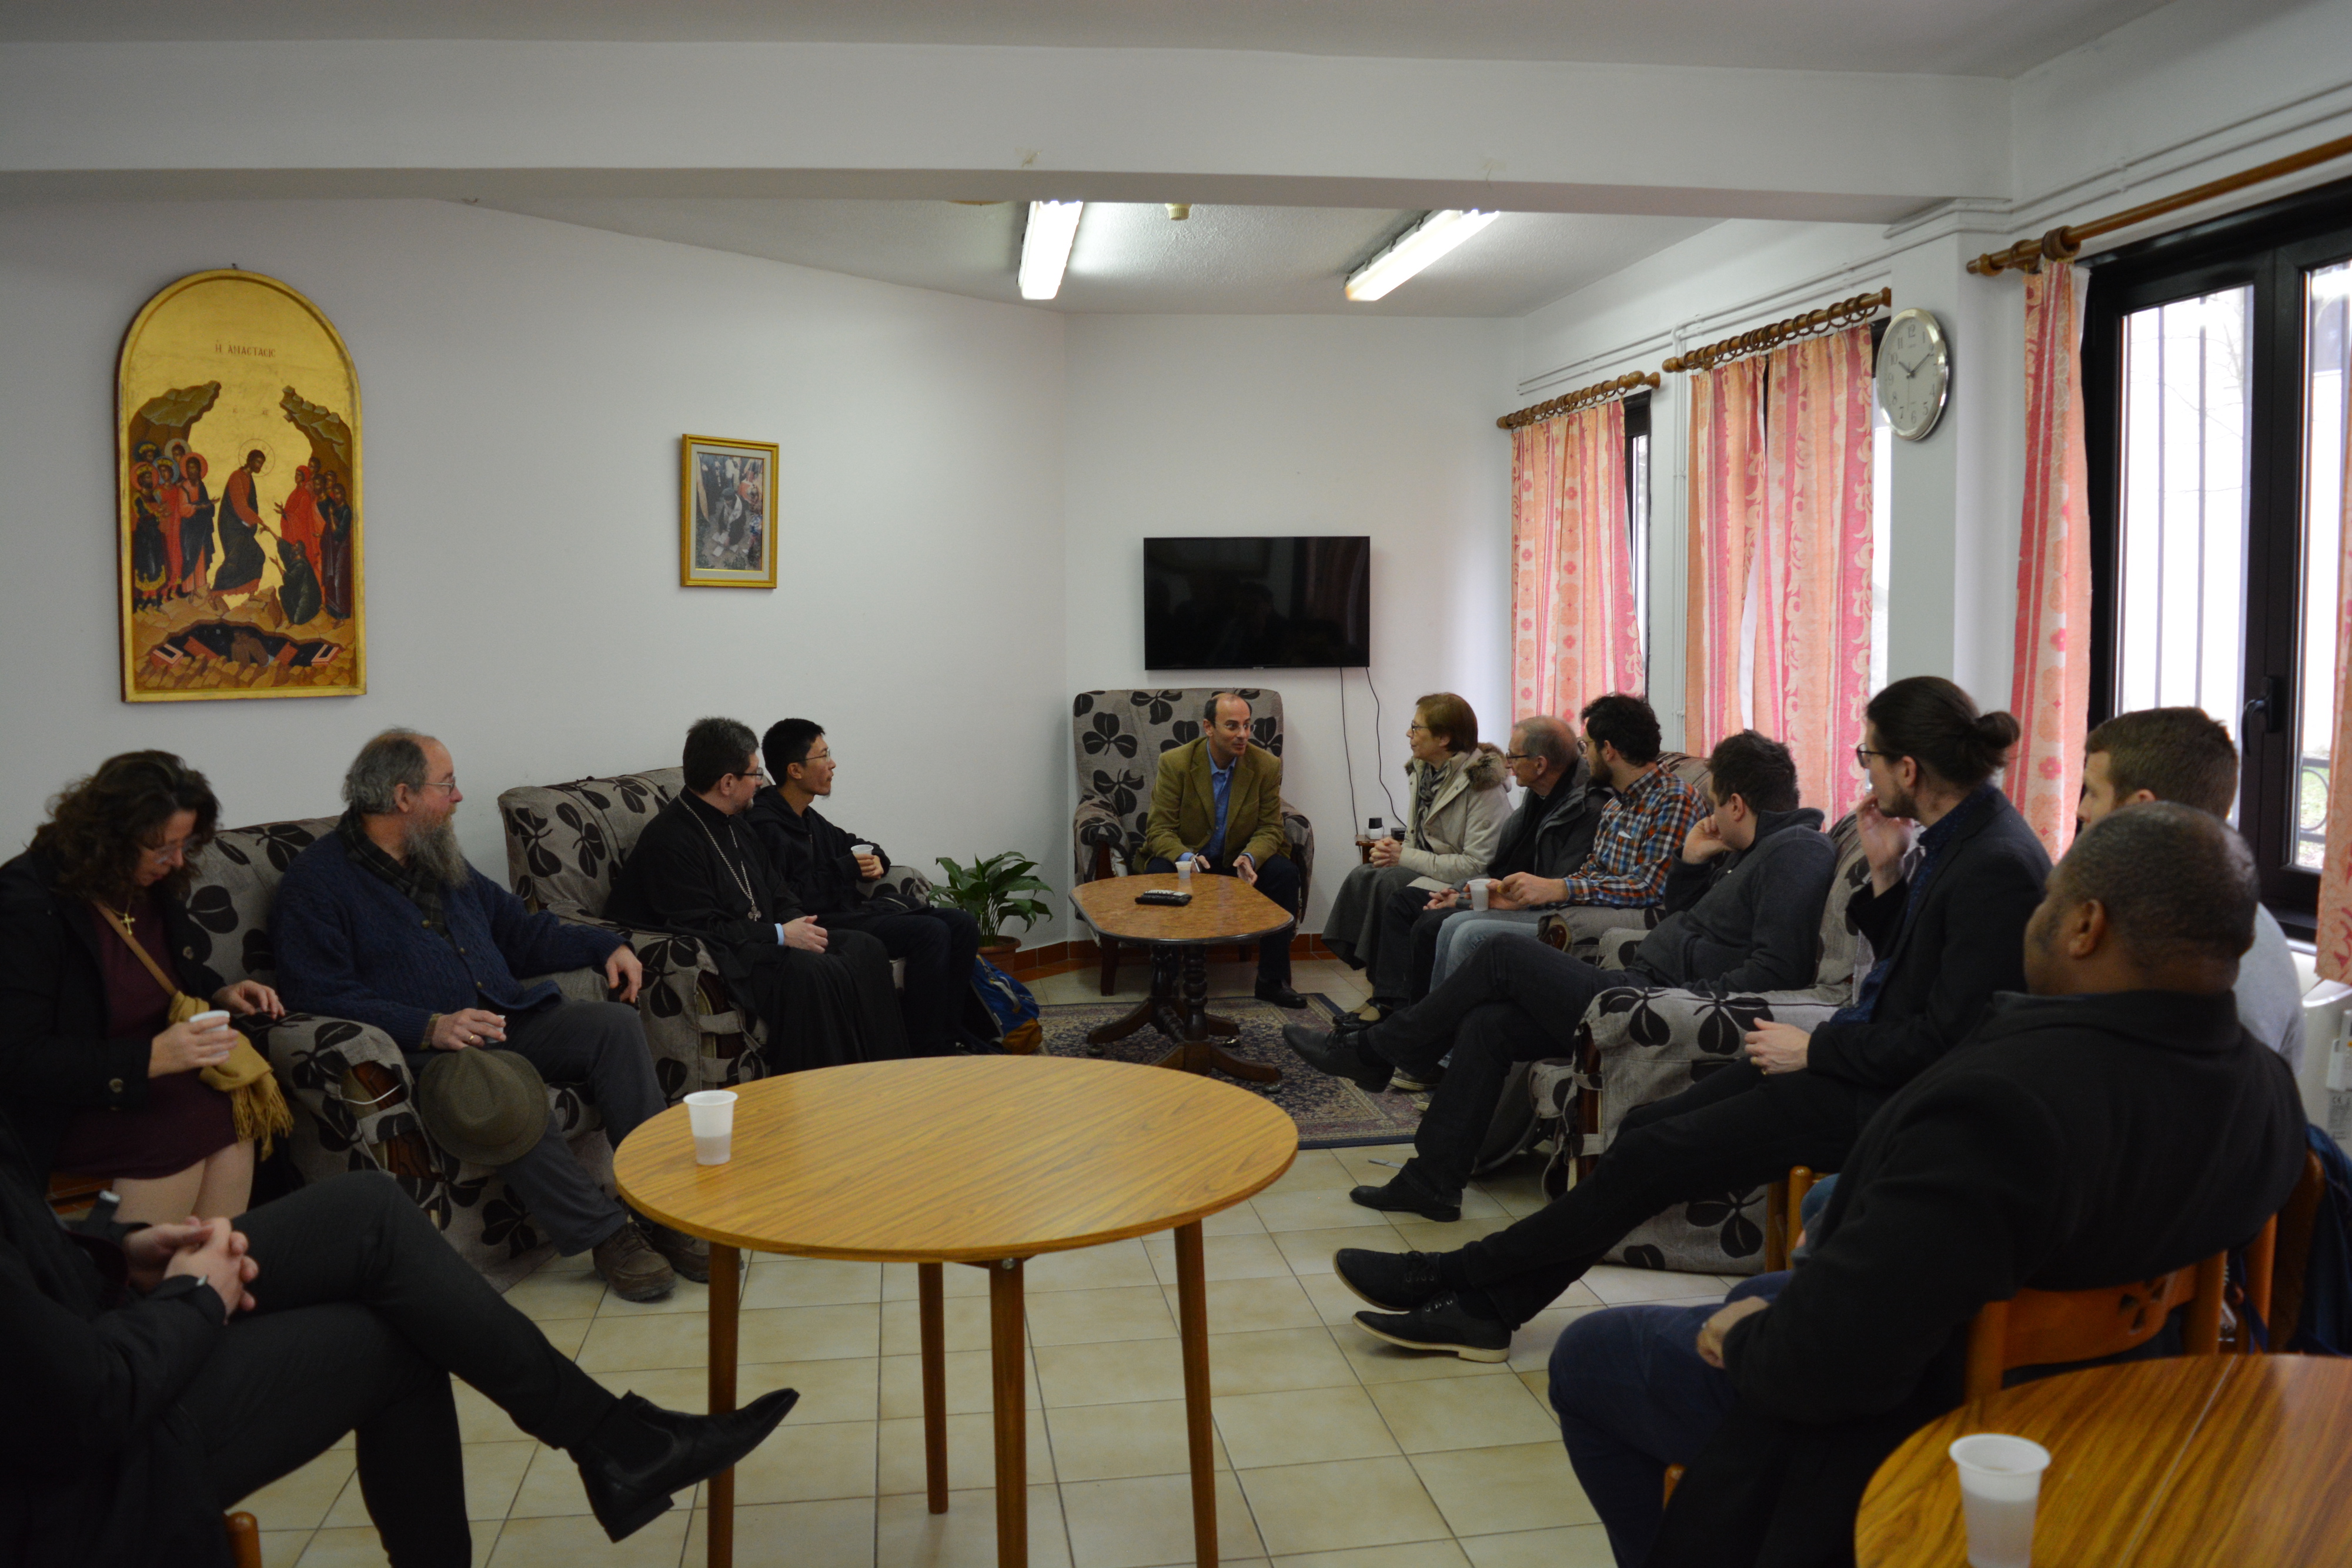 Reception in the Theological Faculty of the Logos University by Prof. Georgios Gaitanos